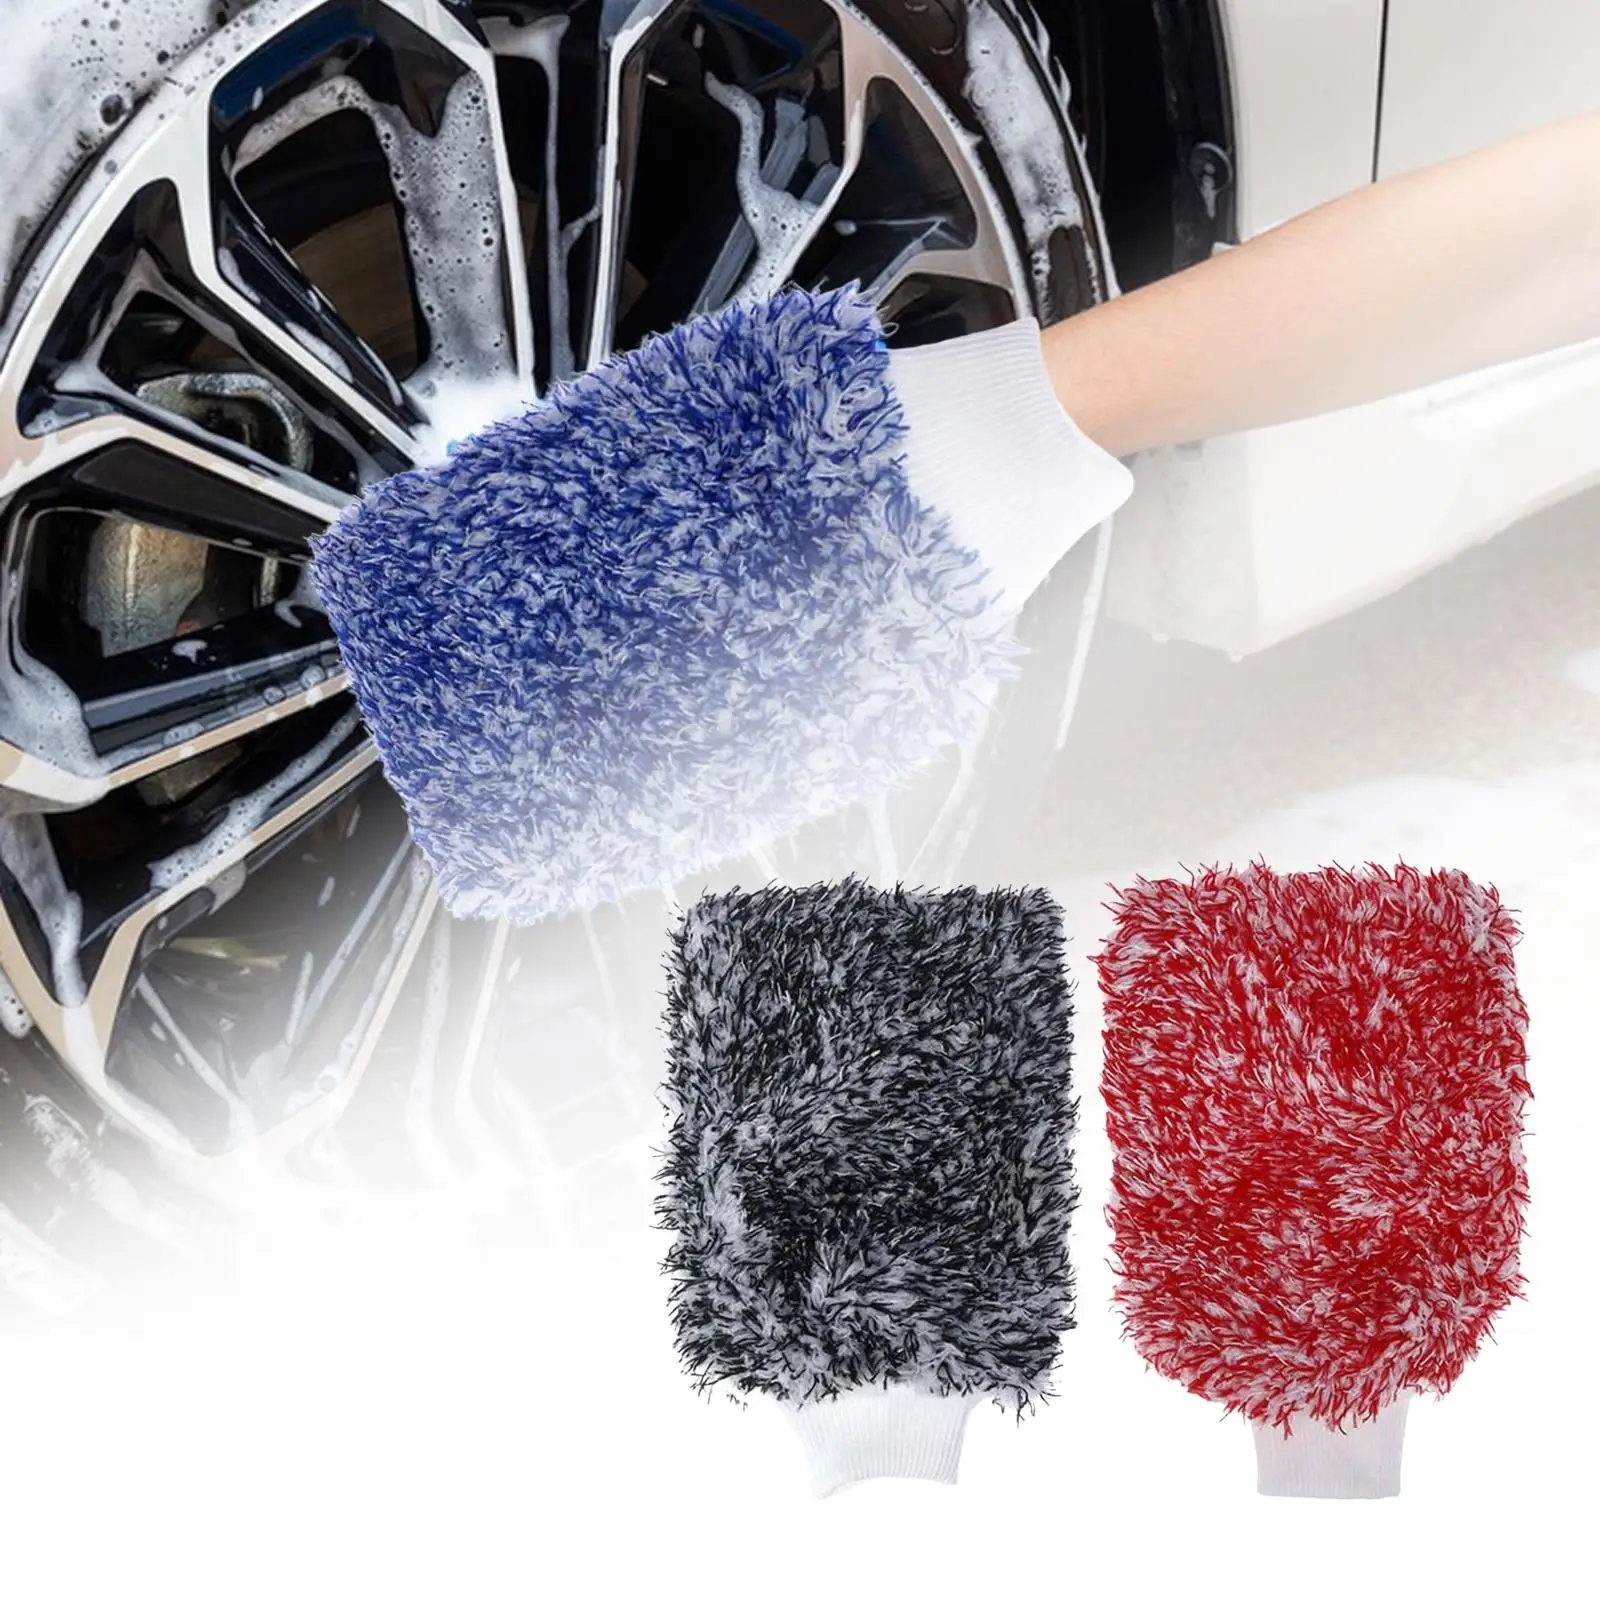 Car Wash Mitt Absorbent Holds Tons of Sudsy Water Effective Washing Microfiber Lint Free Washing Glove for Automotives Cars